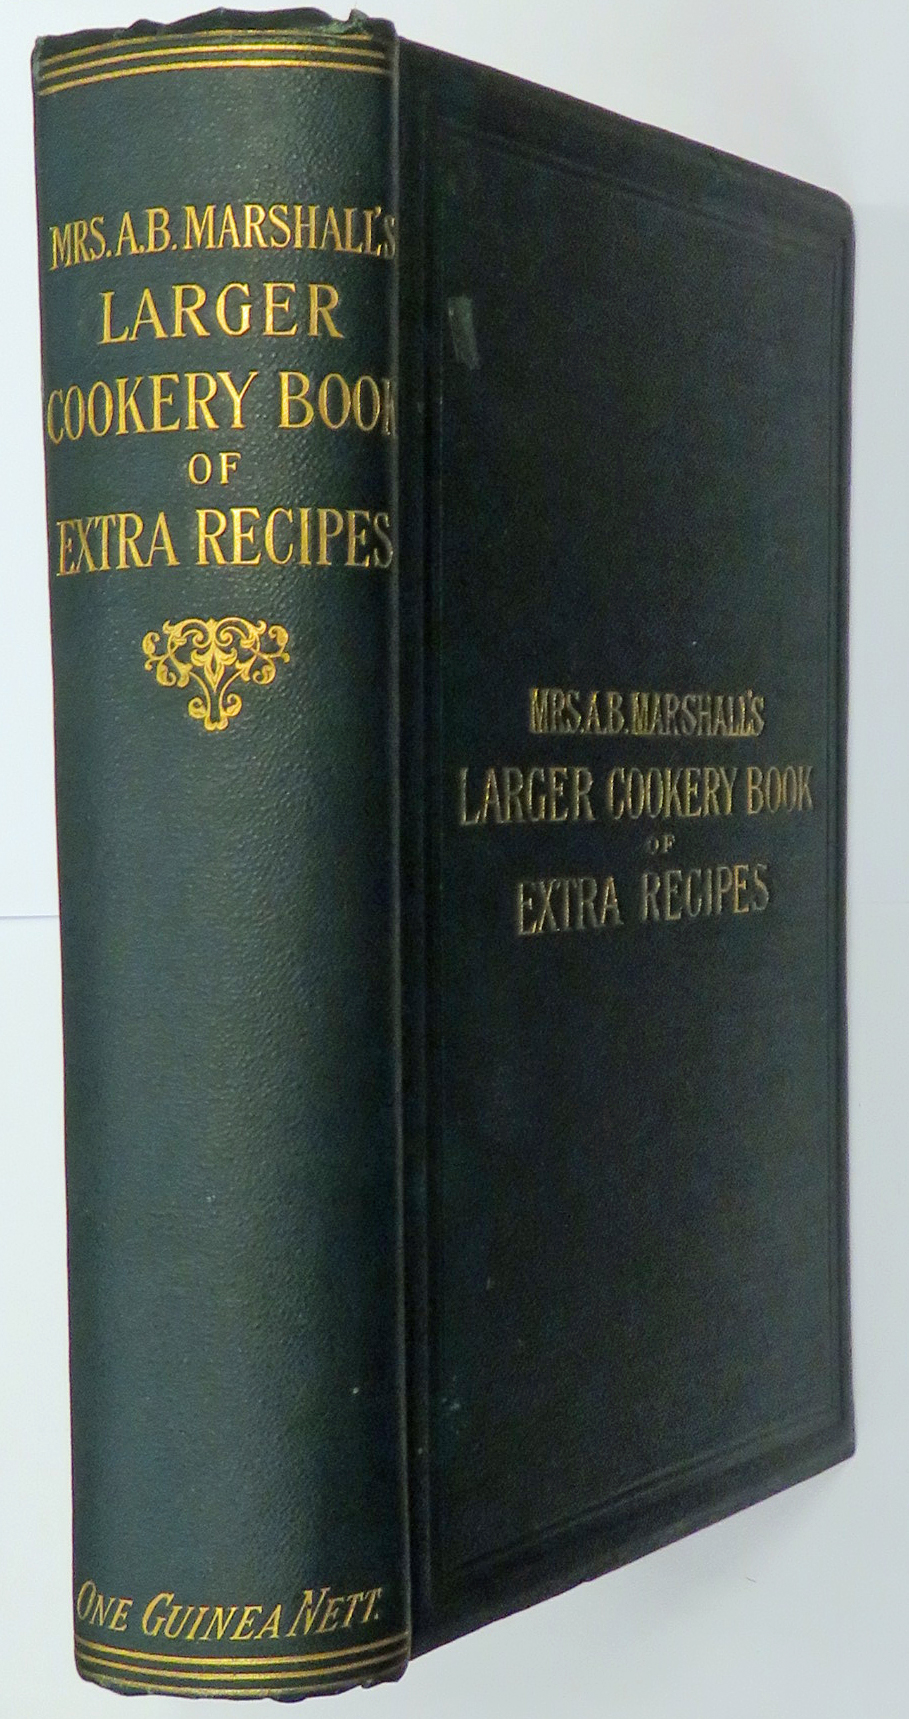 Mrs A. B. Marshall's Larger Cookery Book of Extra Recipes